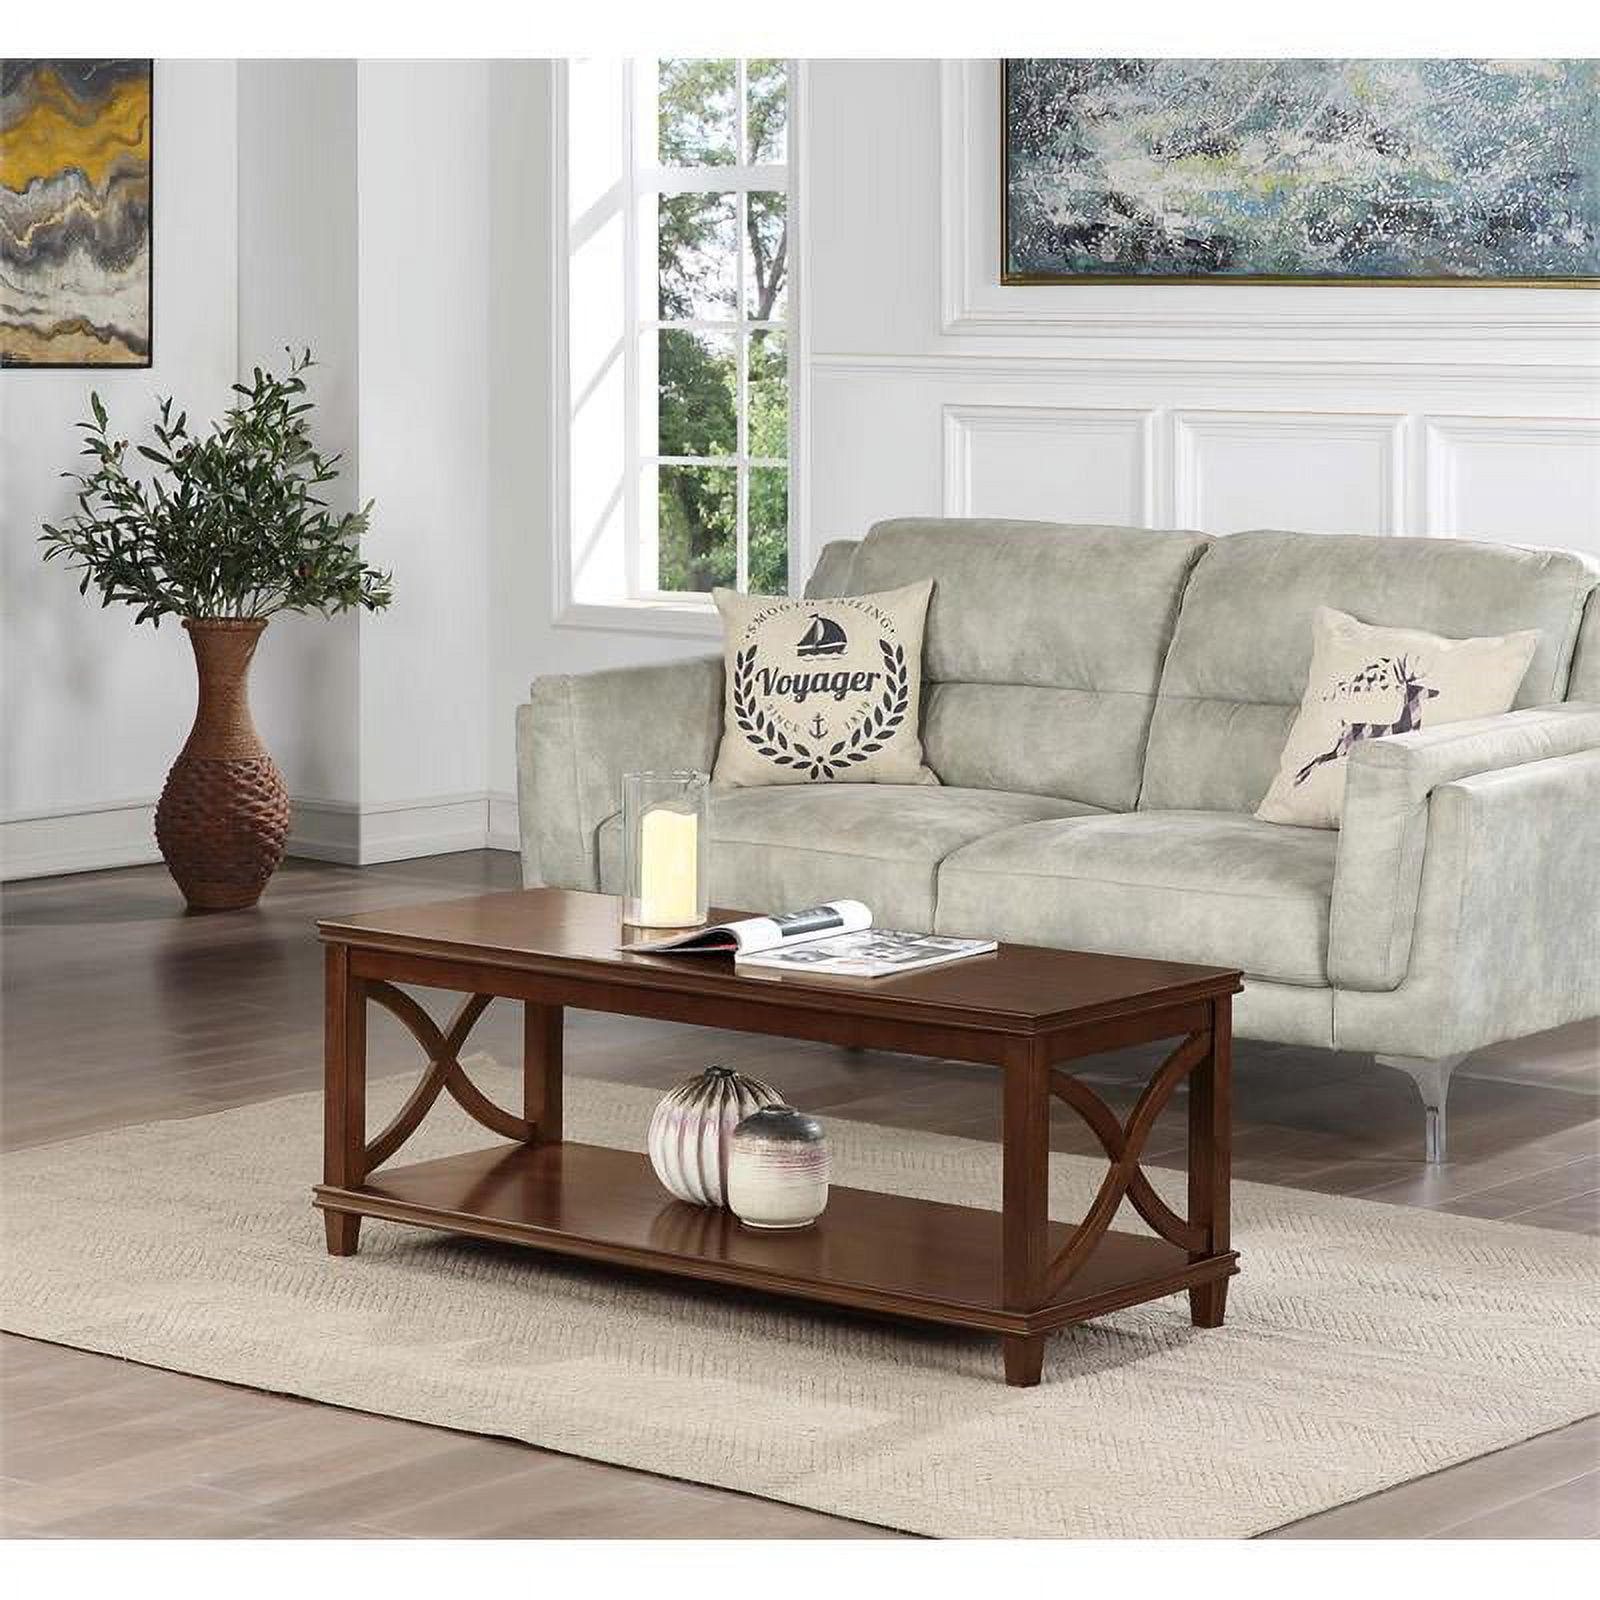 Pemberly Row Coffee Table In Espresso Wood Finish – Walmart Pertaining To Espresso Wood Finish Coffee Tables (Photo 1 of 15)